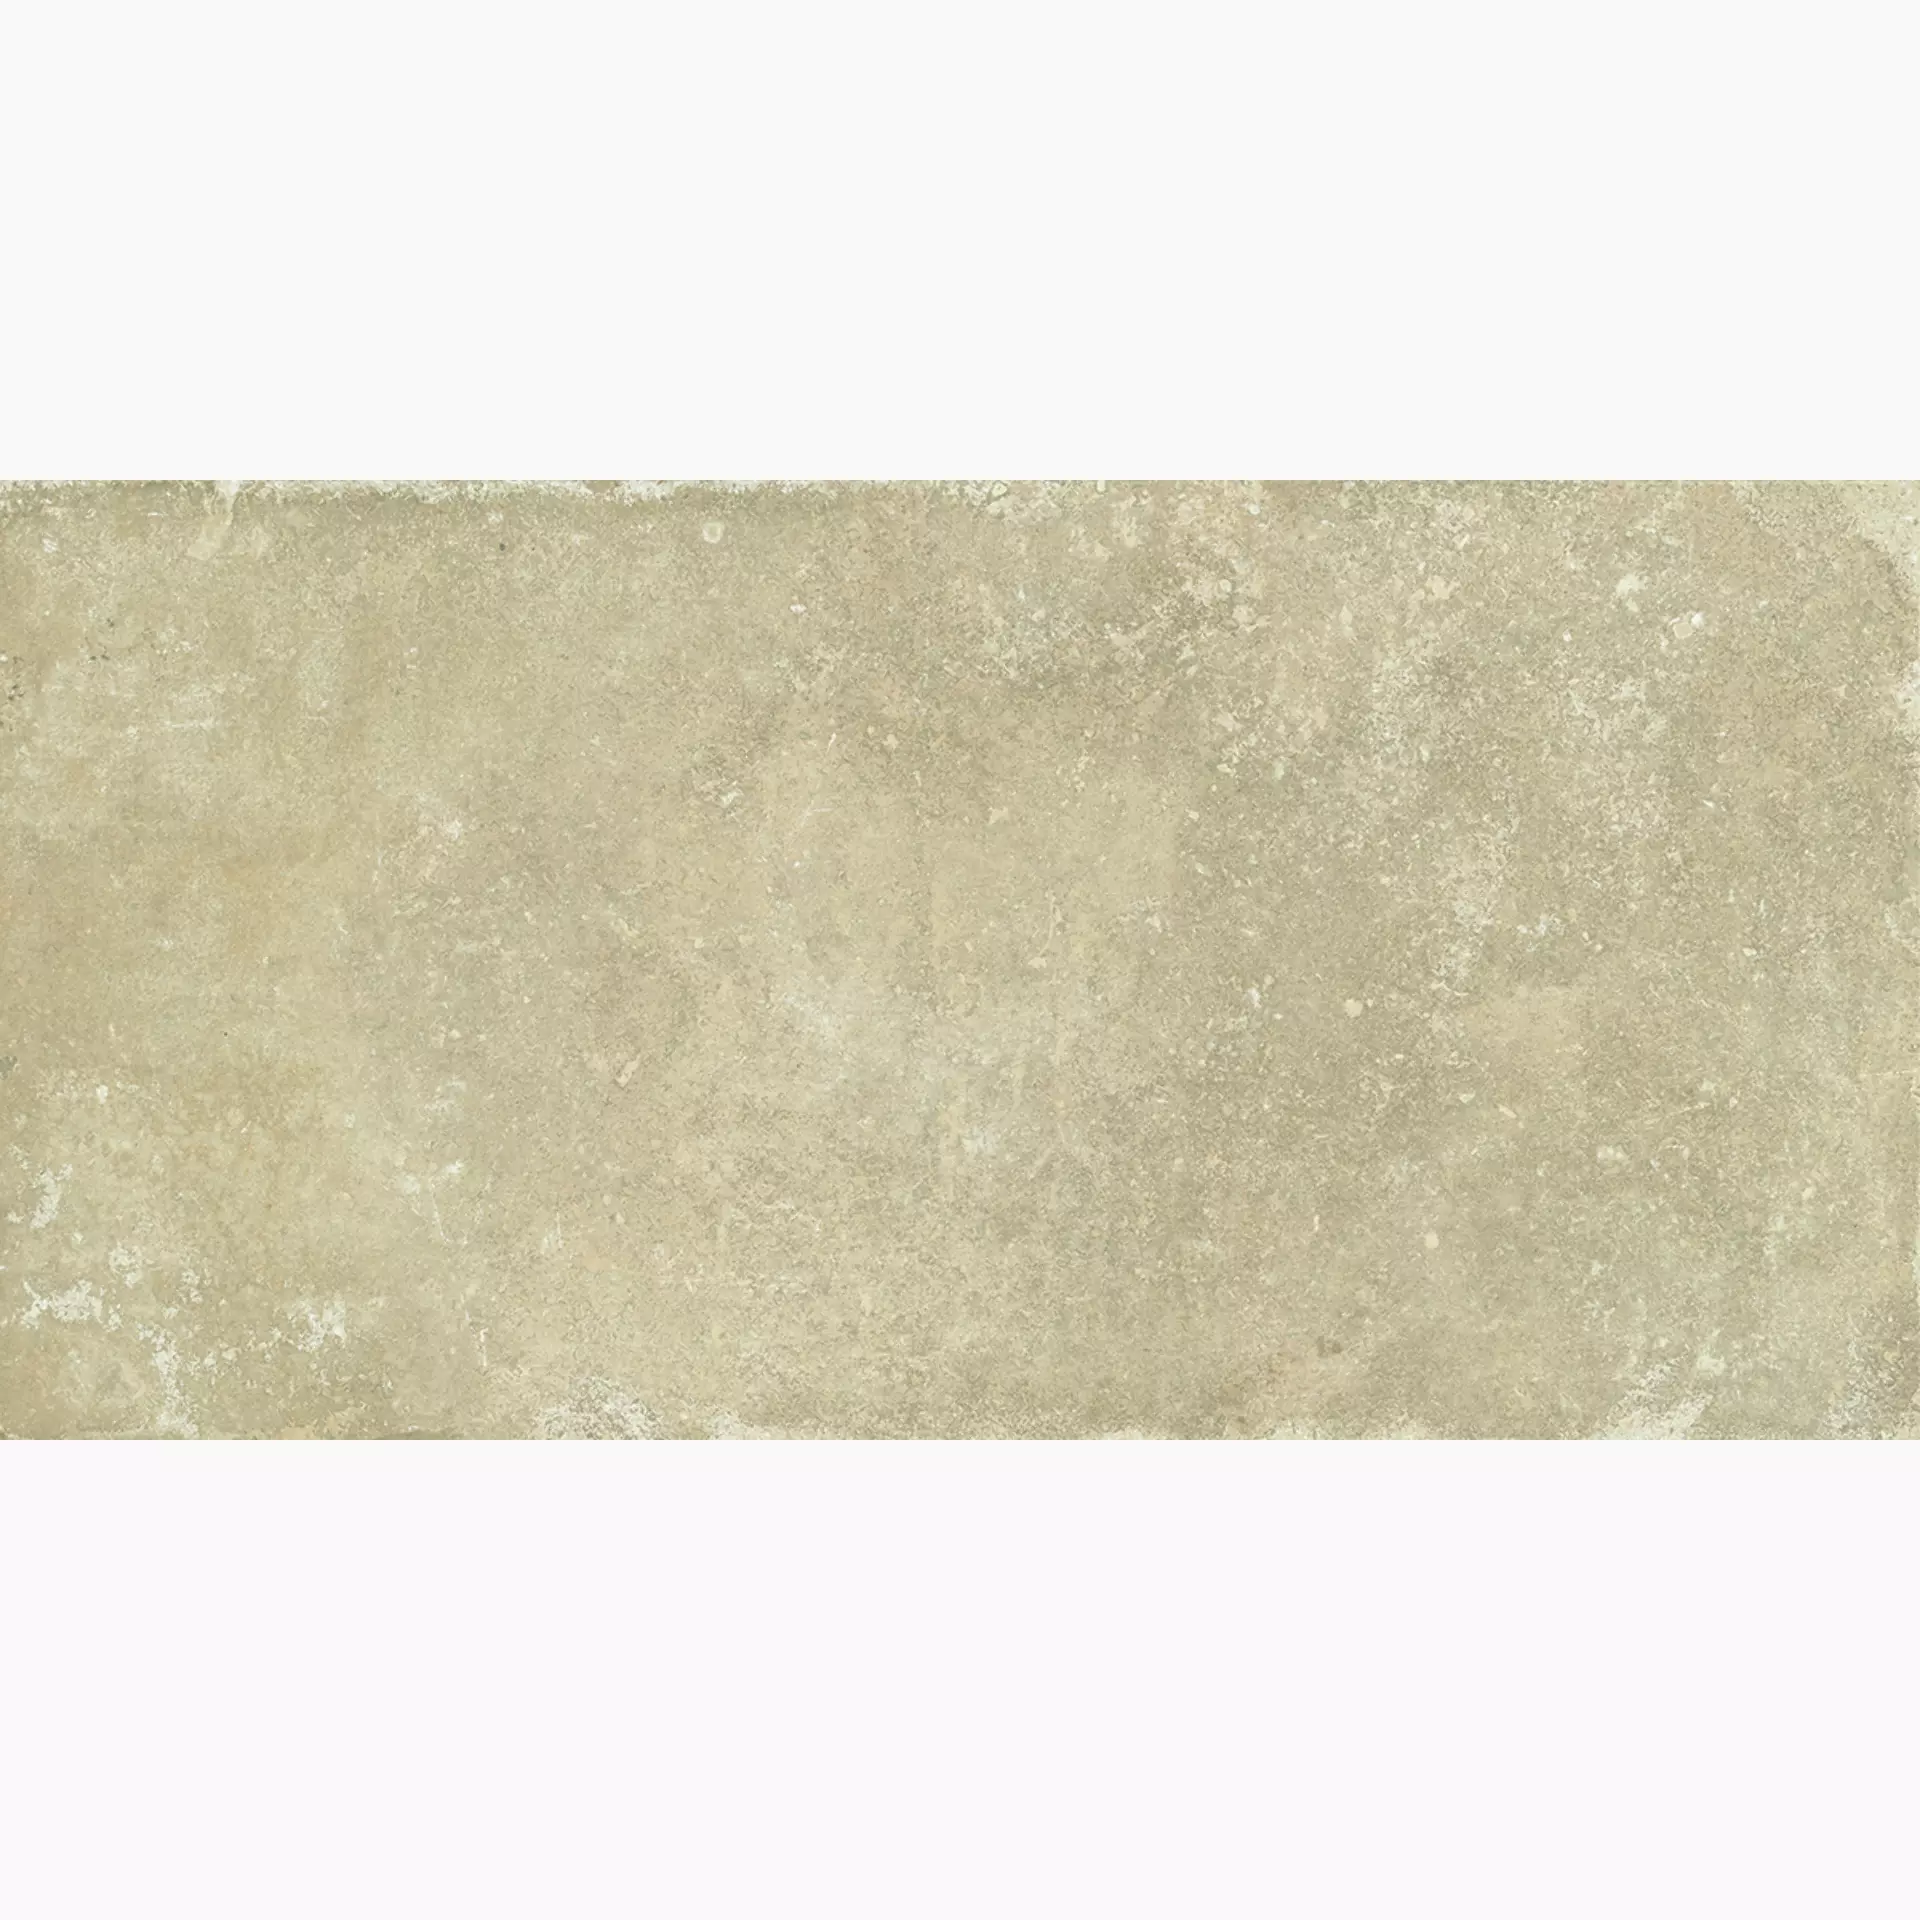 Alfalux Cottage Taupe Silk 8290137 30x60cm rectified 9mm